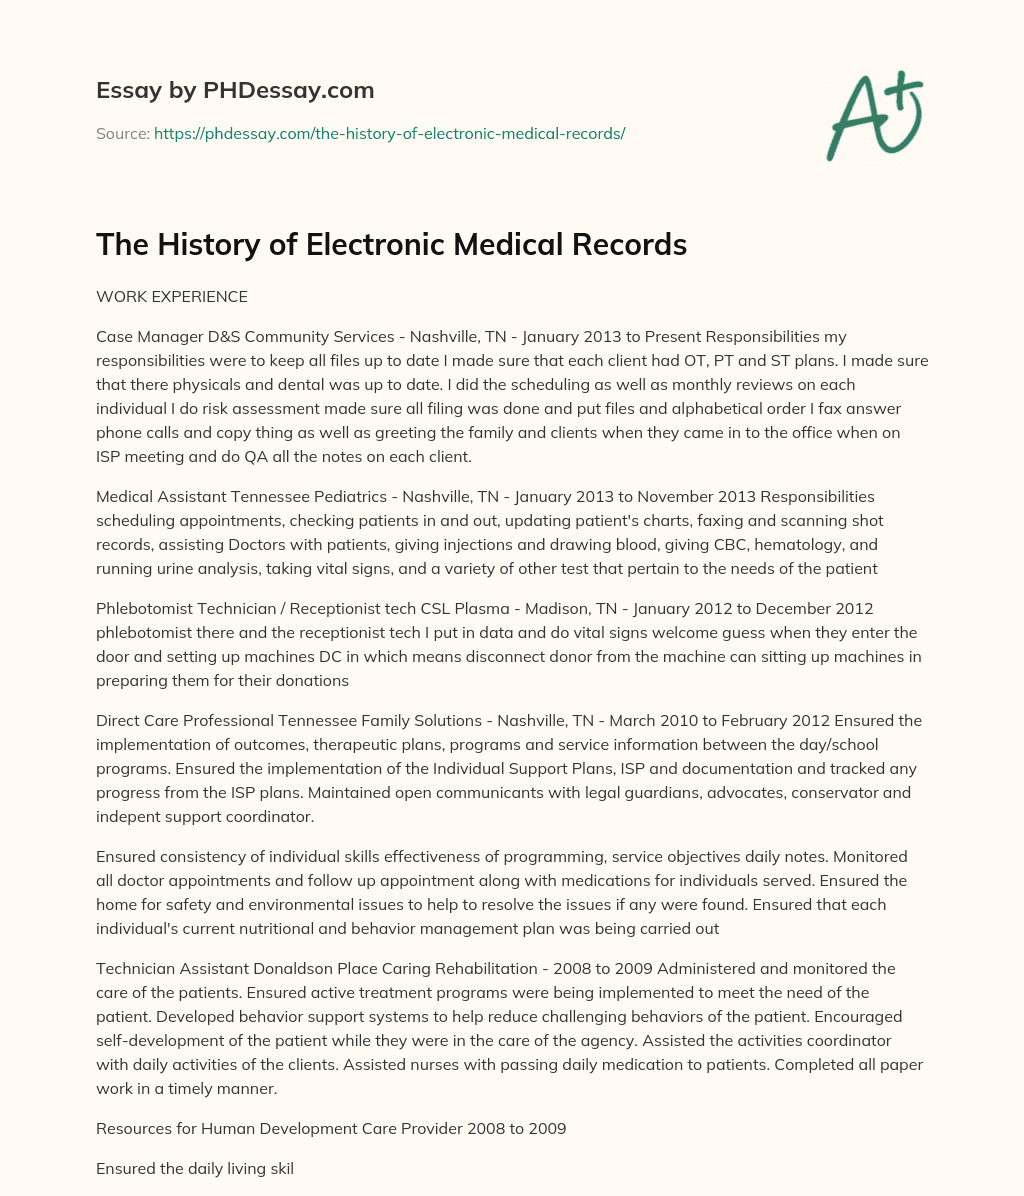 The History of Electronic Medical Records essay